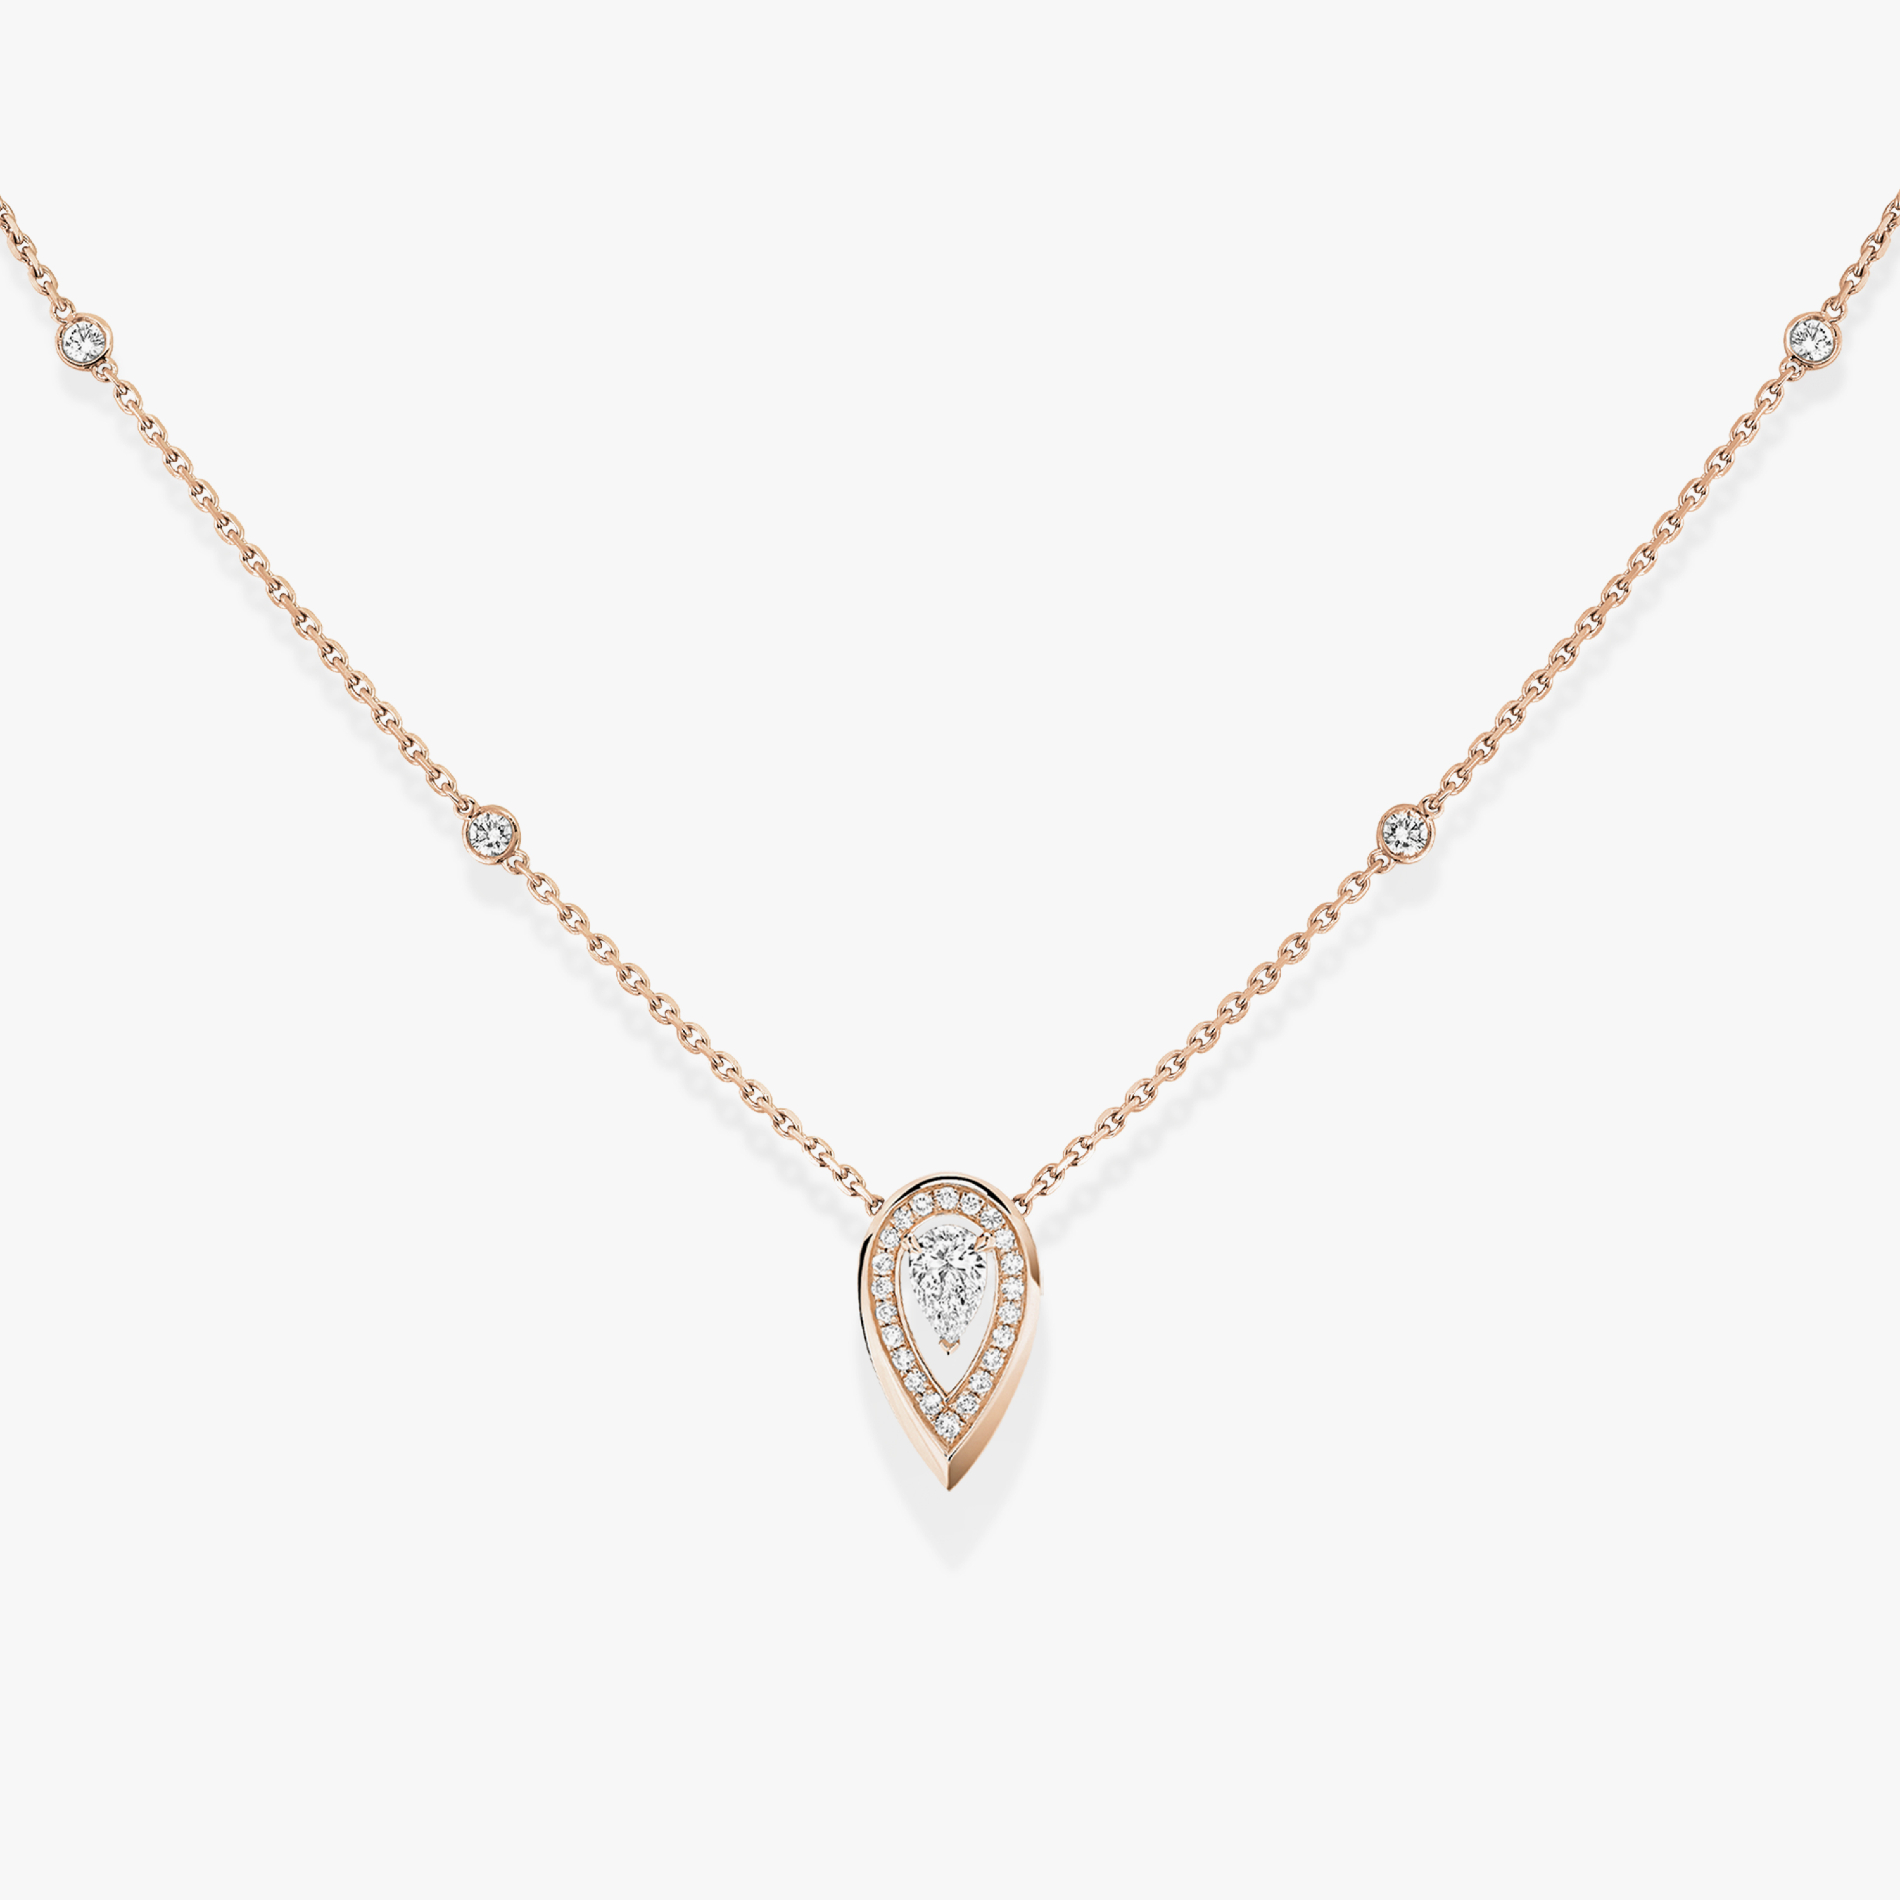 Necklace For Her Pink Gold Diamond Fiery 0.10ct 12611-PG